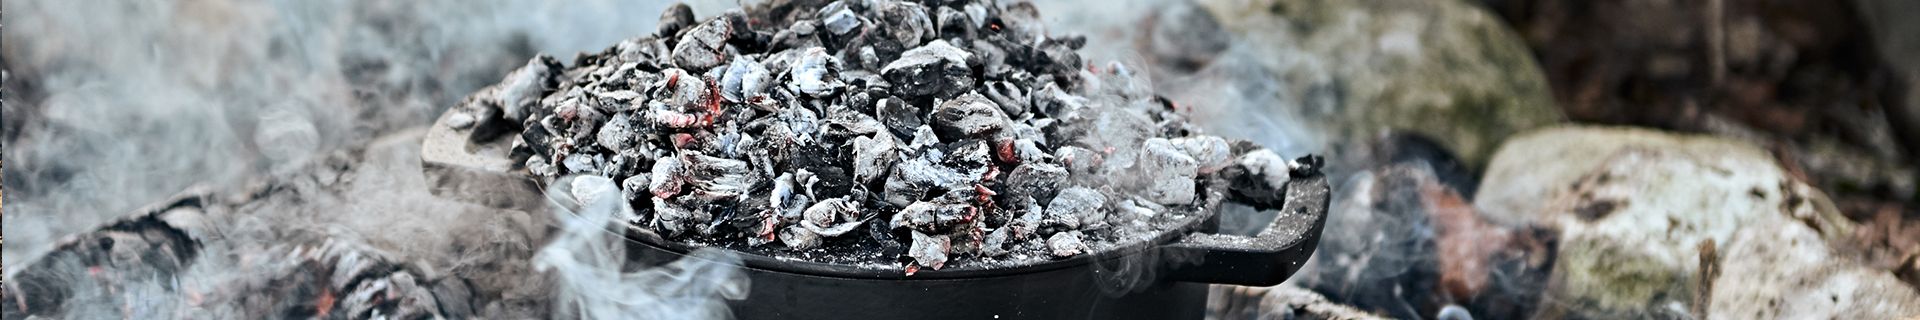 How To Make The Most Of A Cast Iron Pot